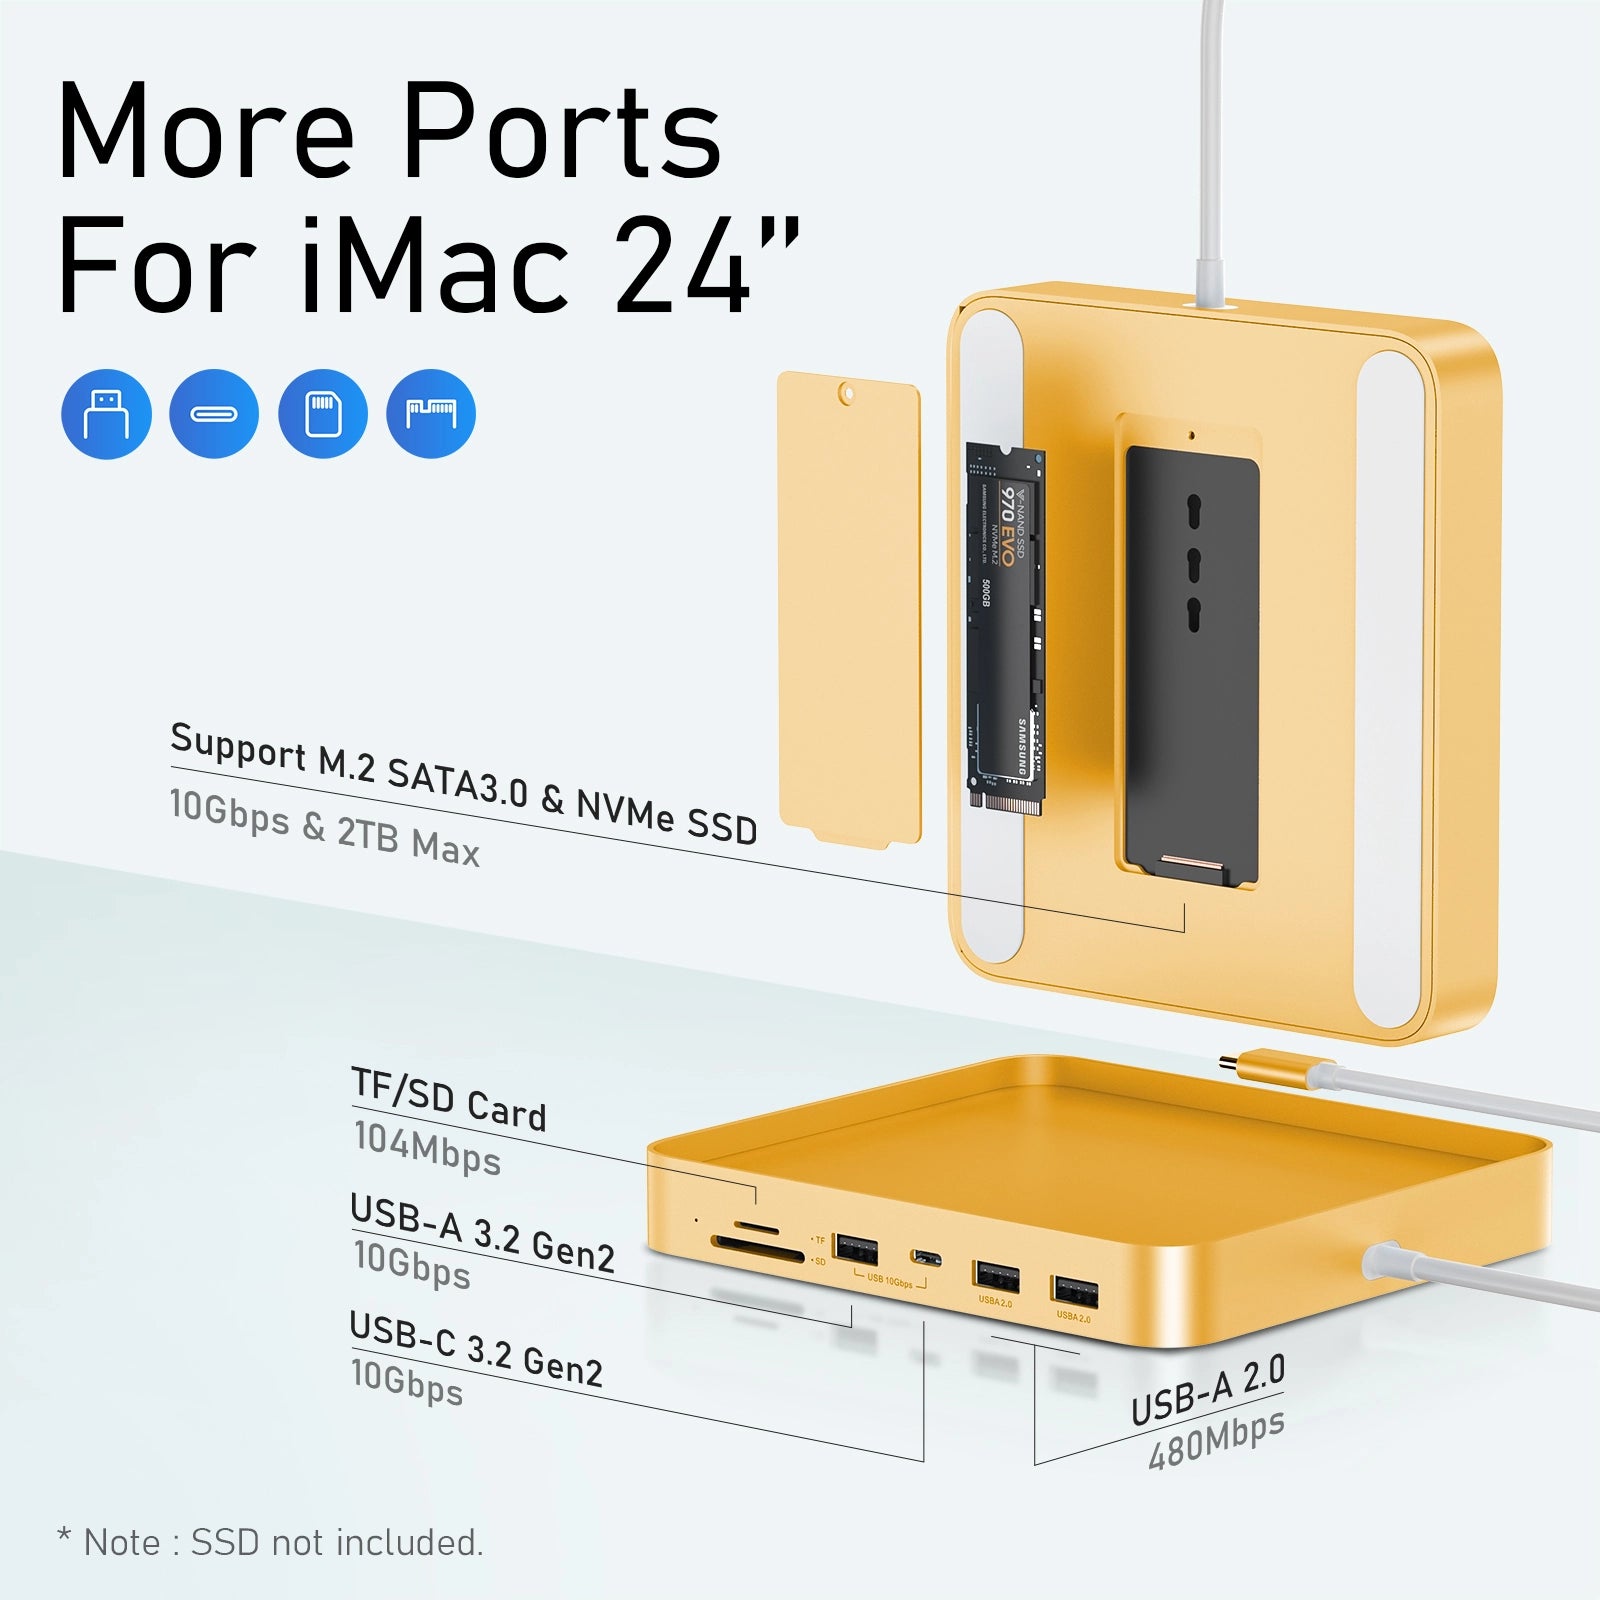 PULWTOP 7-in-1 USB C HUB for iMac 24-inch 2021, USB Hub Adapter iMac Accessory, Docking Station Supports Expansion M.2 NVMe SSD (Not Included) - Yellow